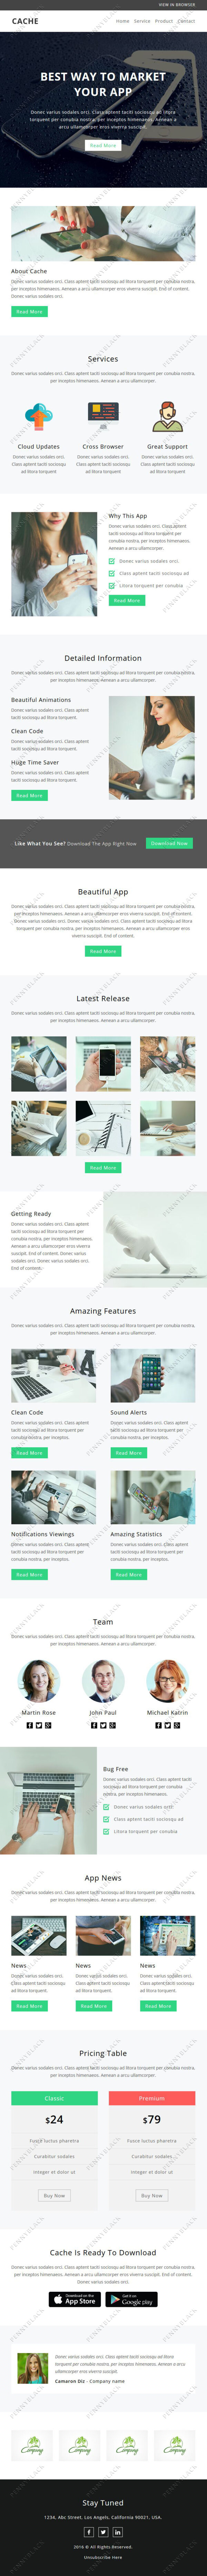 Cache - Responsive Email Template